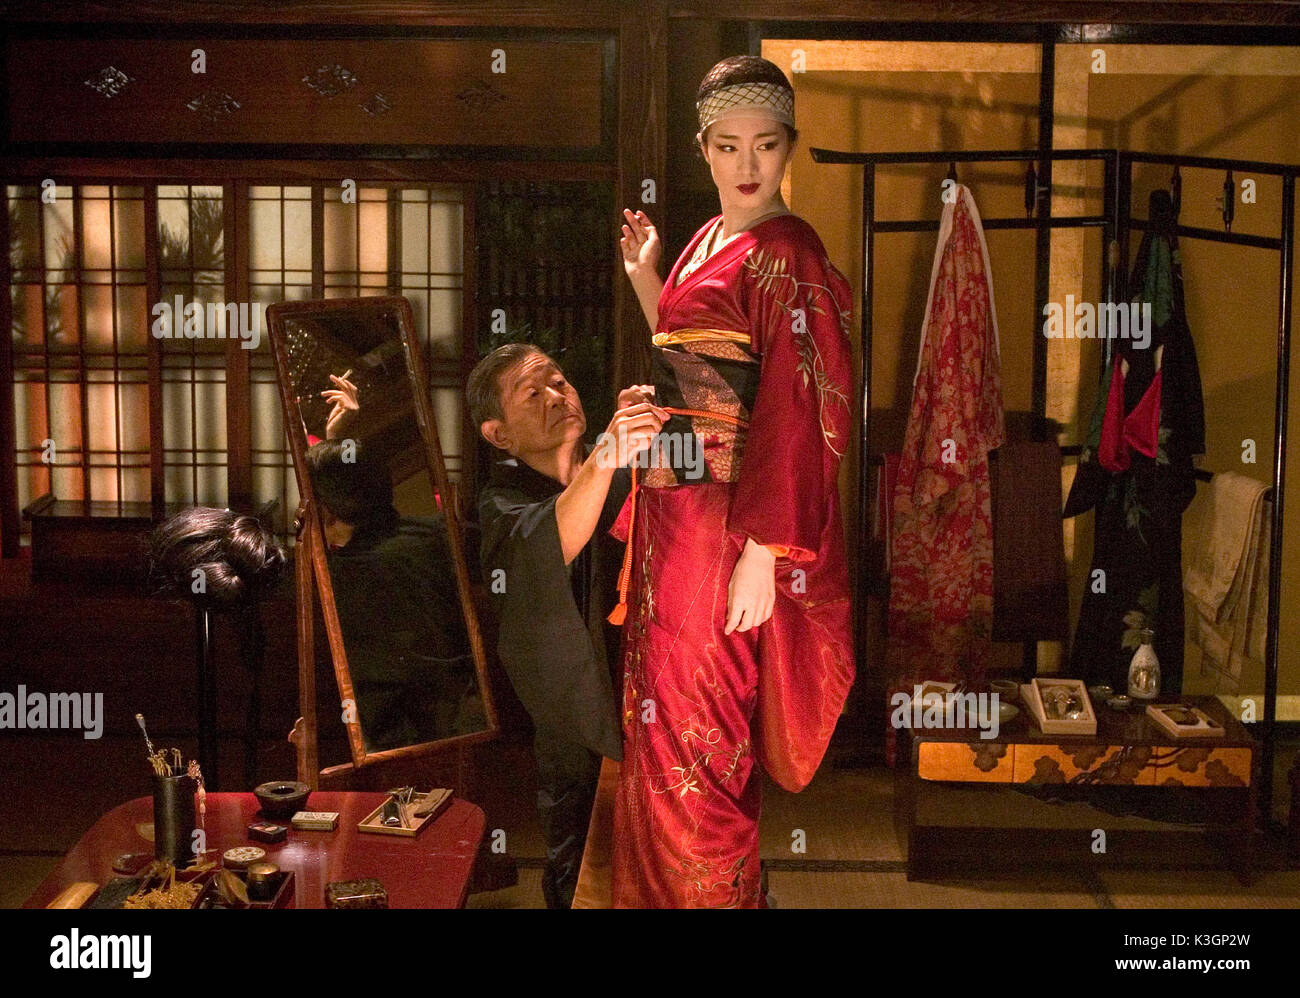 Gong Li as 'Hatsumomo' in &quot;Memoirs of a Geisha&quot; **ALL IMAGES ARE  PROPERTY OF SONY PICTURES ENTERTAINMENT INC. FOR PROMOTIONAL USE ONLY.  SALE, DUPLICATION OR TRANSFER OF THIS MATERIAL IS STRICTLY PROHIBITED.